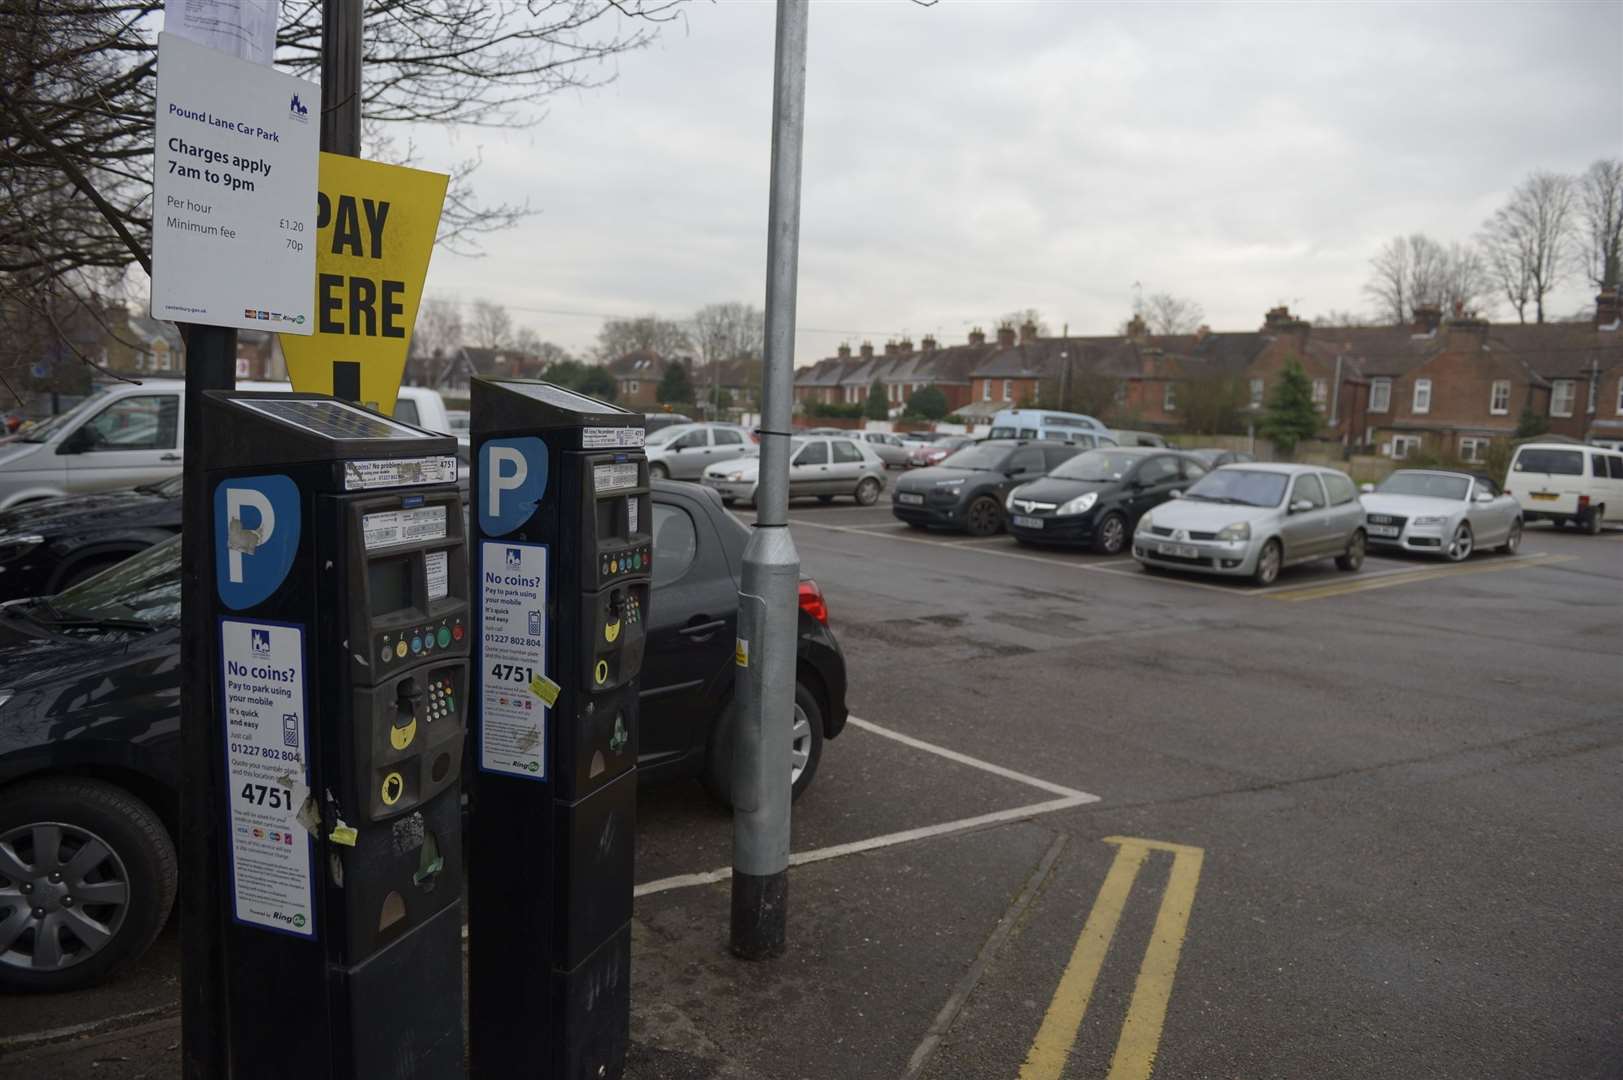 Pound Lane car park in Canterbury could be closed in the future